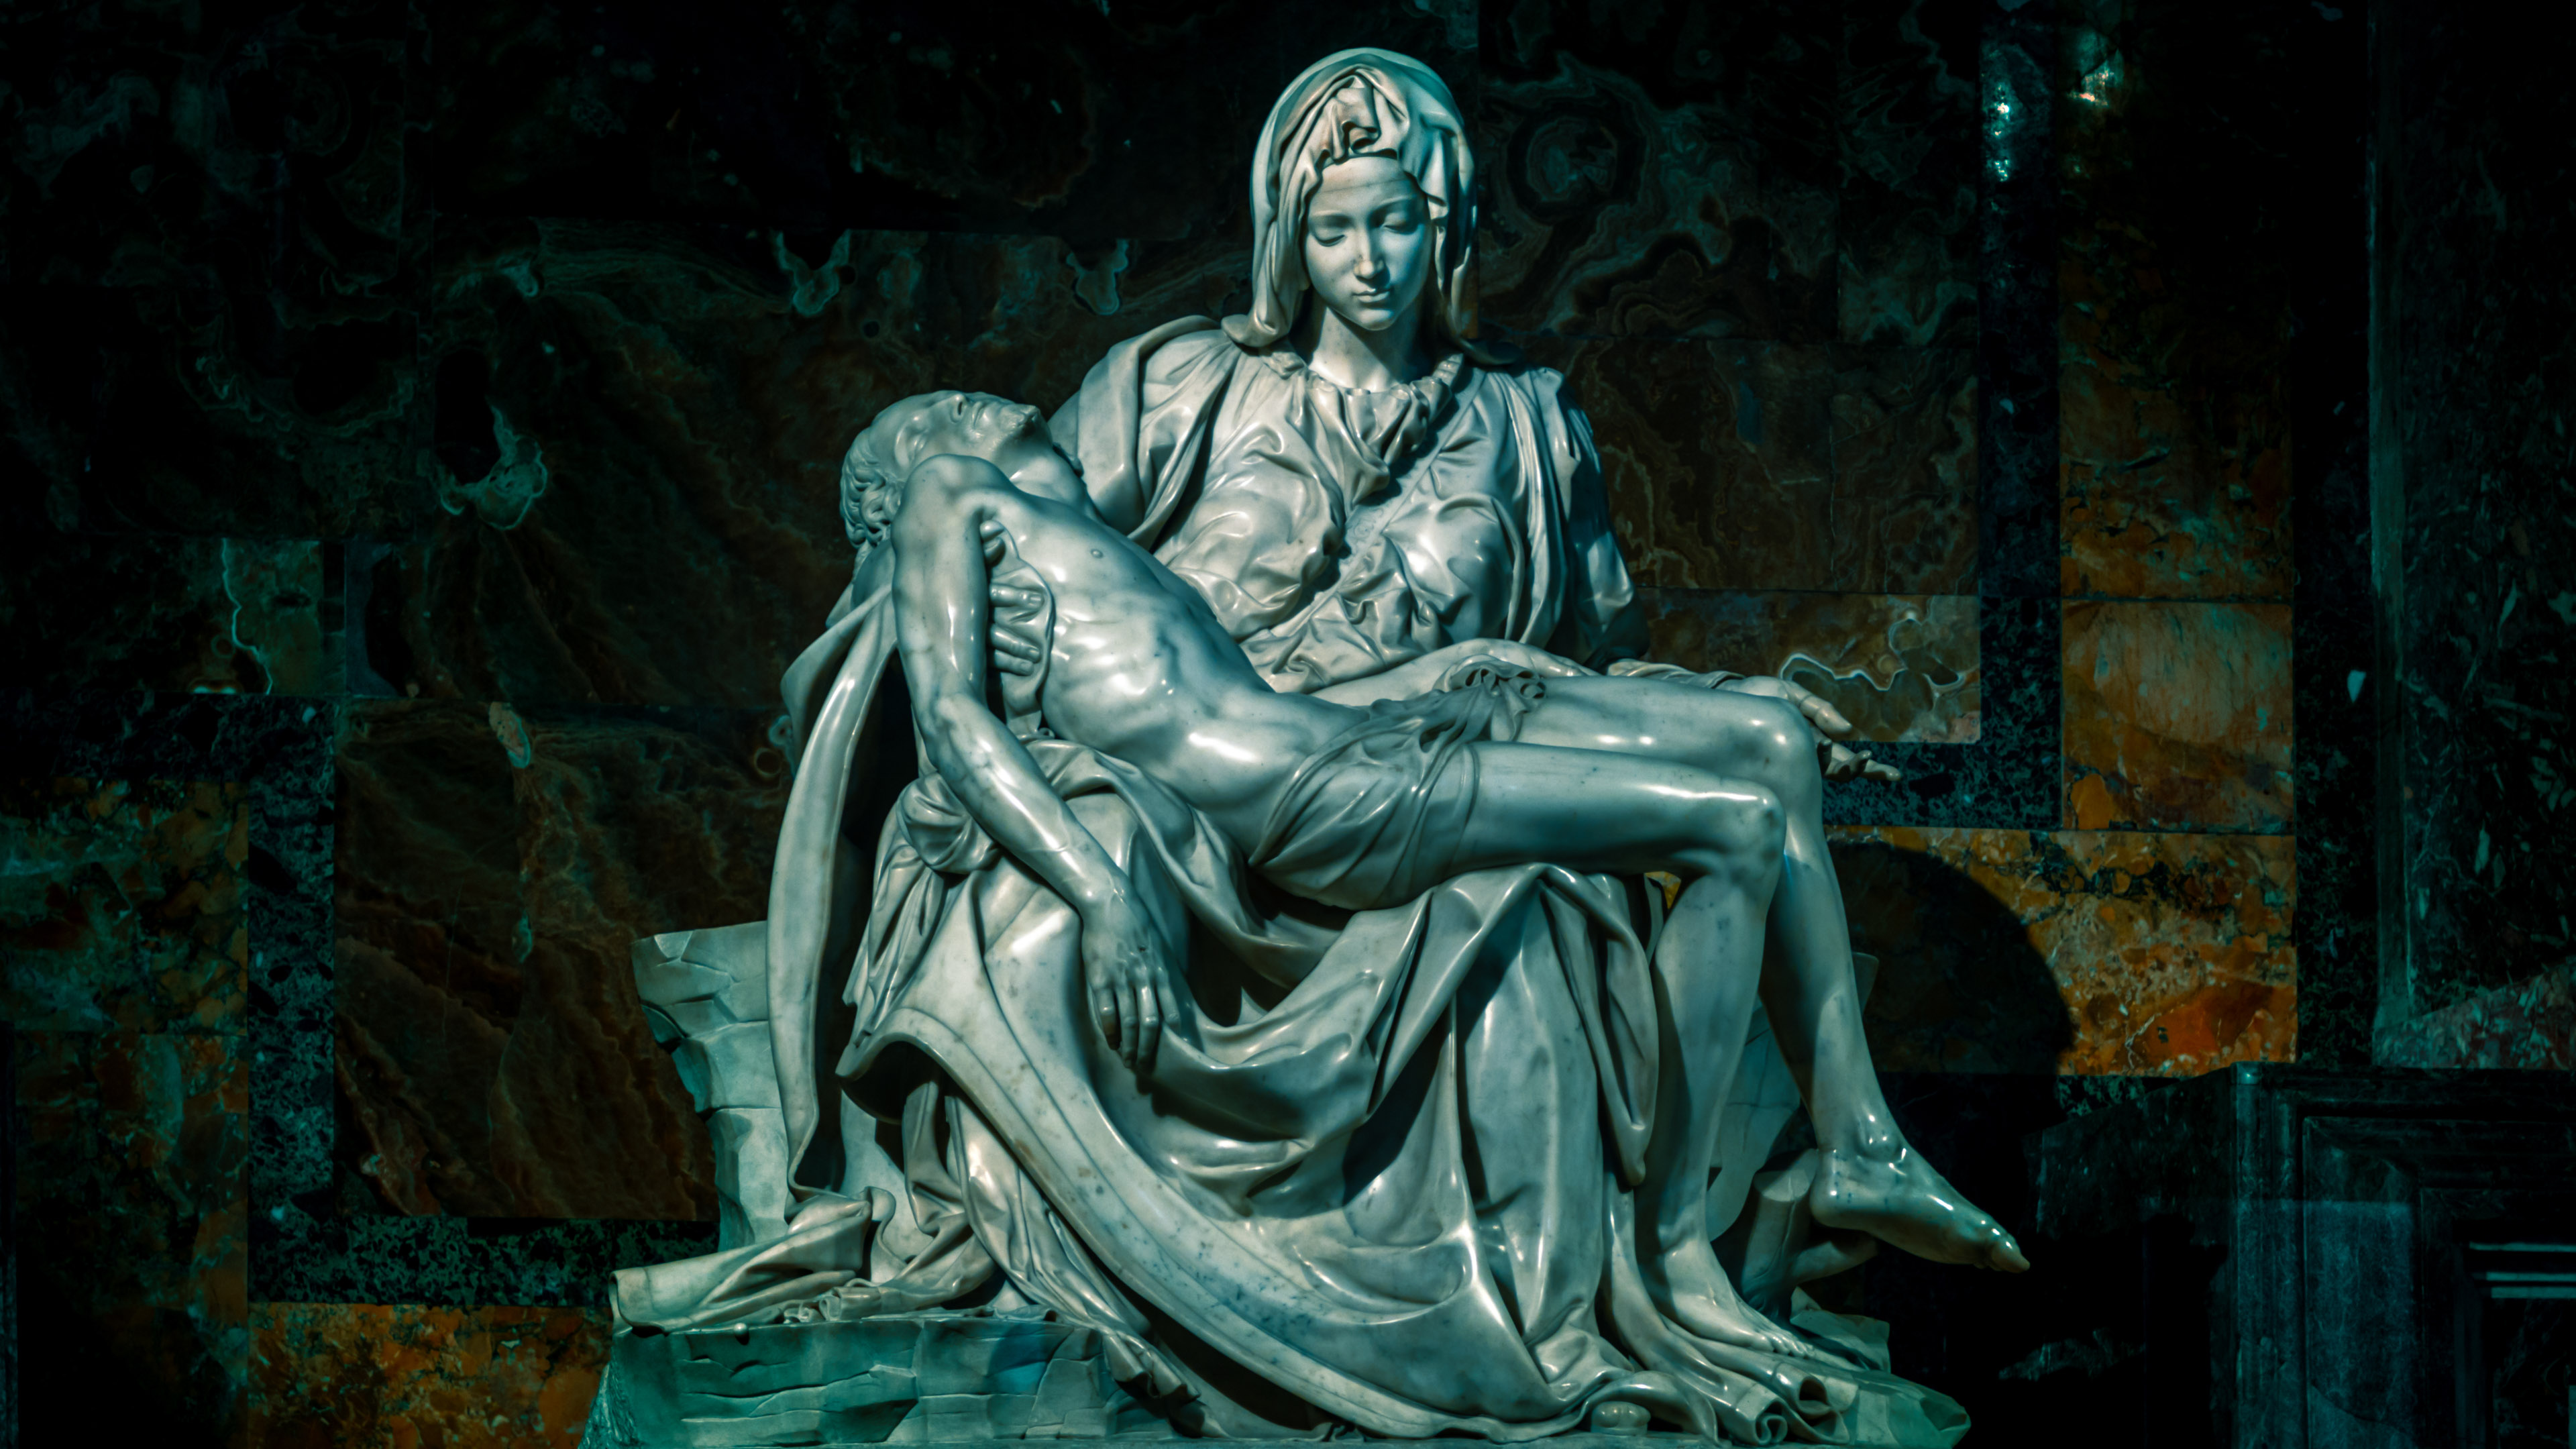 Get inspired with the Michelangelo Pieta wallpaper and admire the beauty and emotion of his Renaissance art, with monumental forms and dramatic effects in 4K ultra HD resolution.